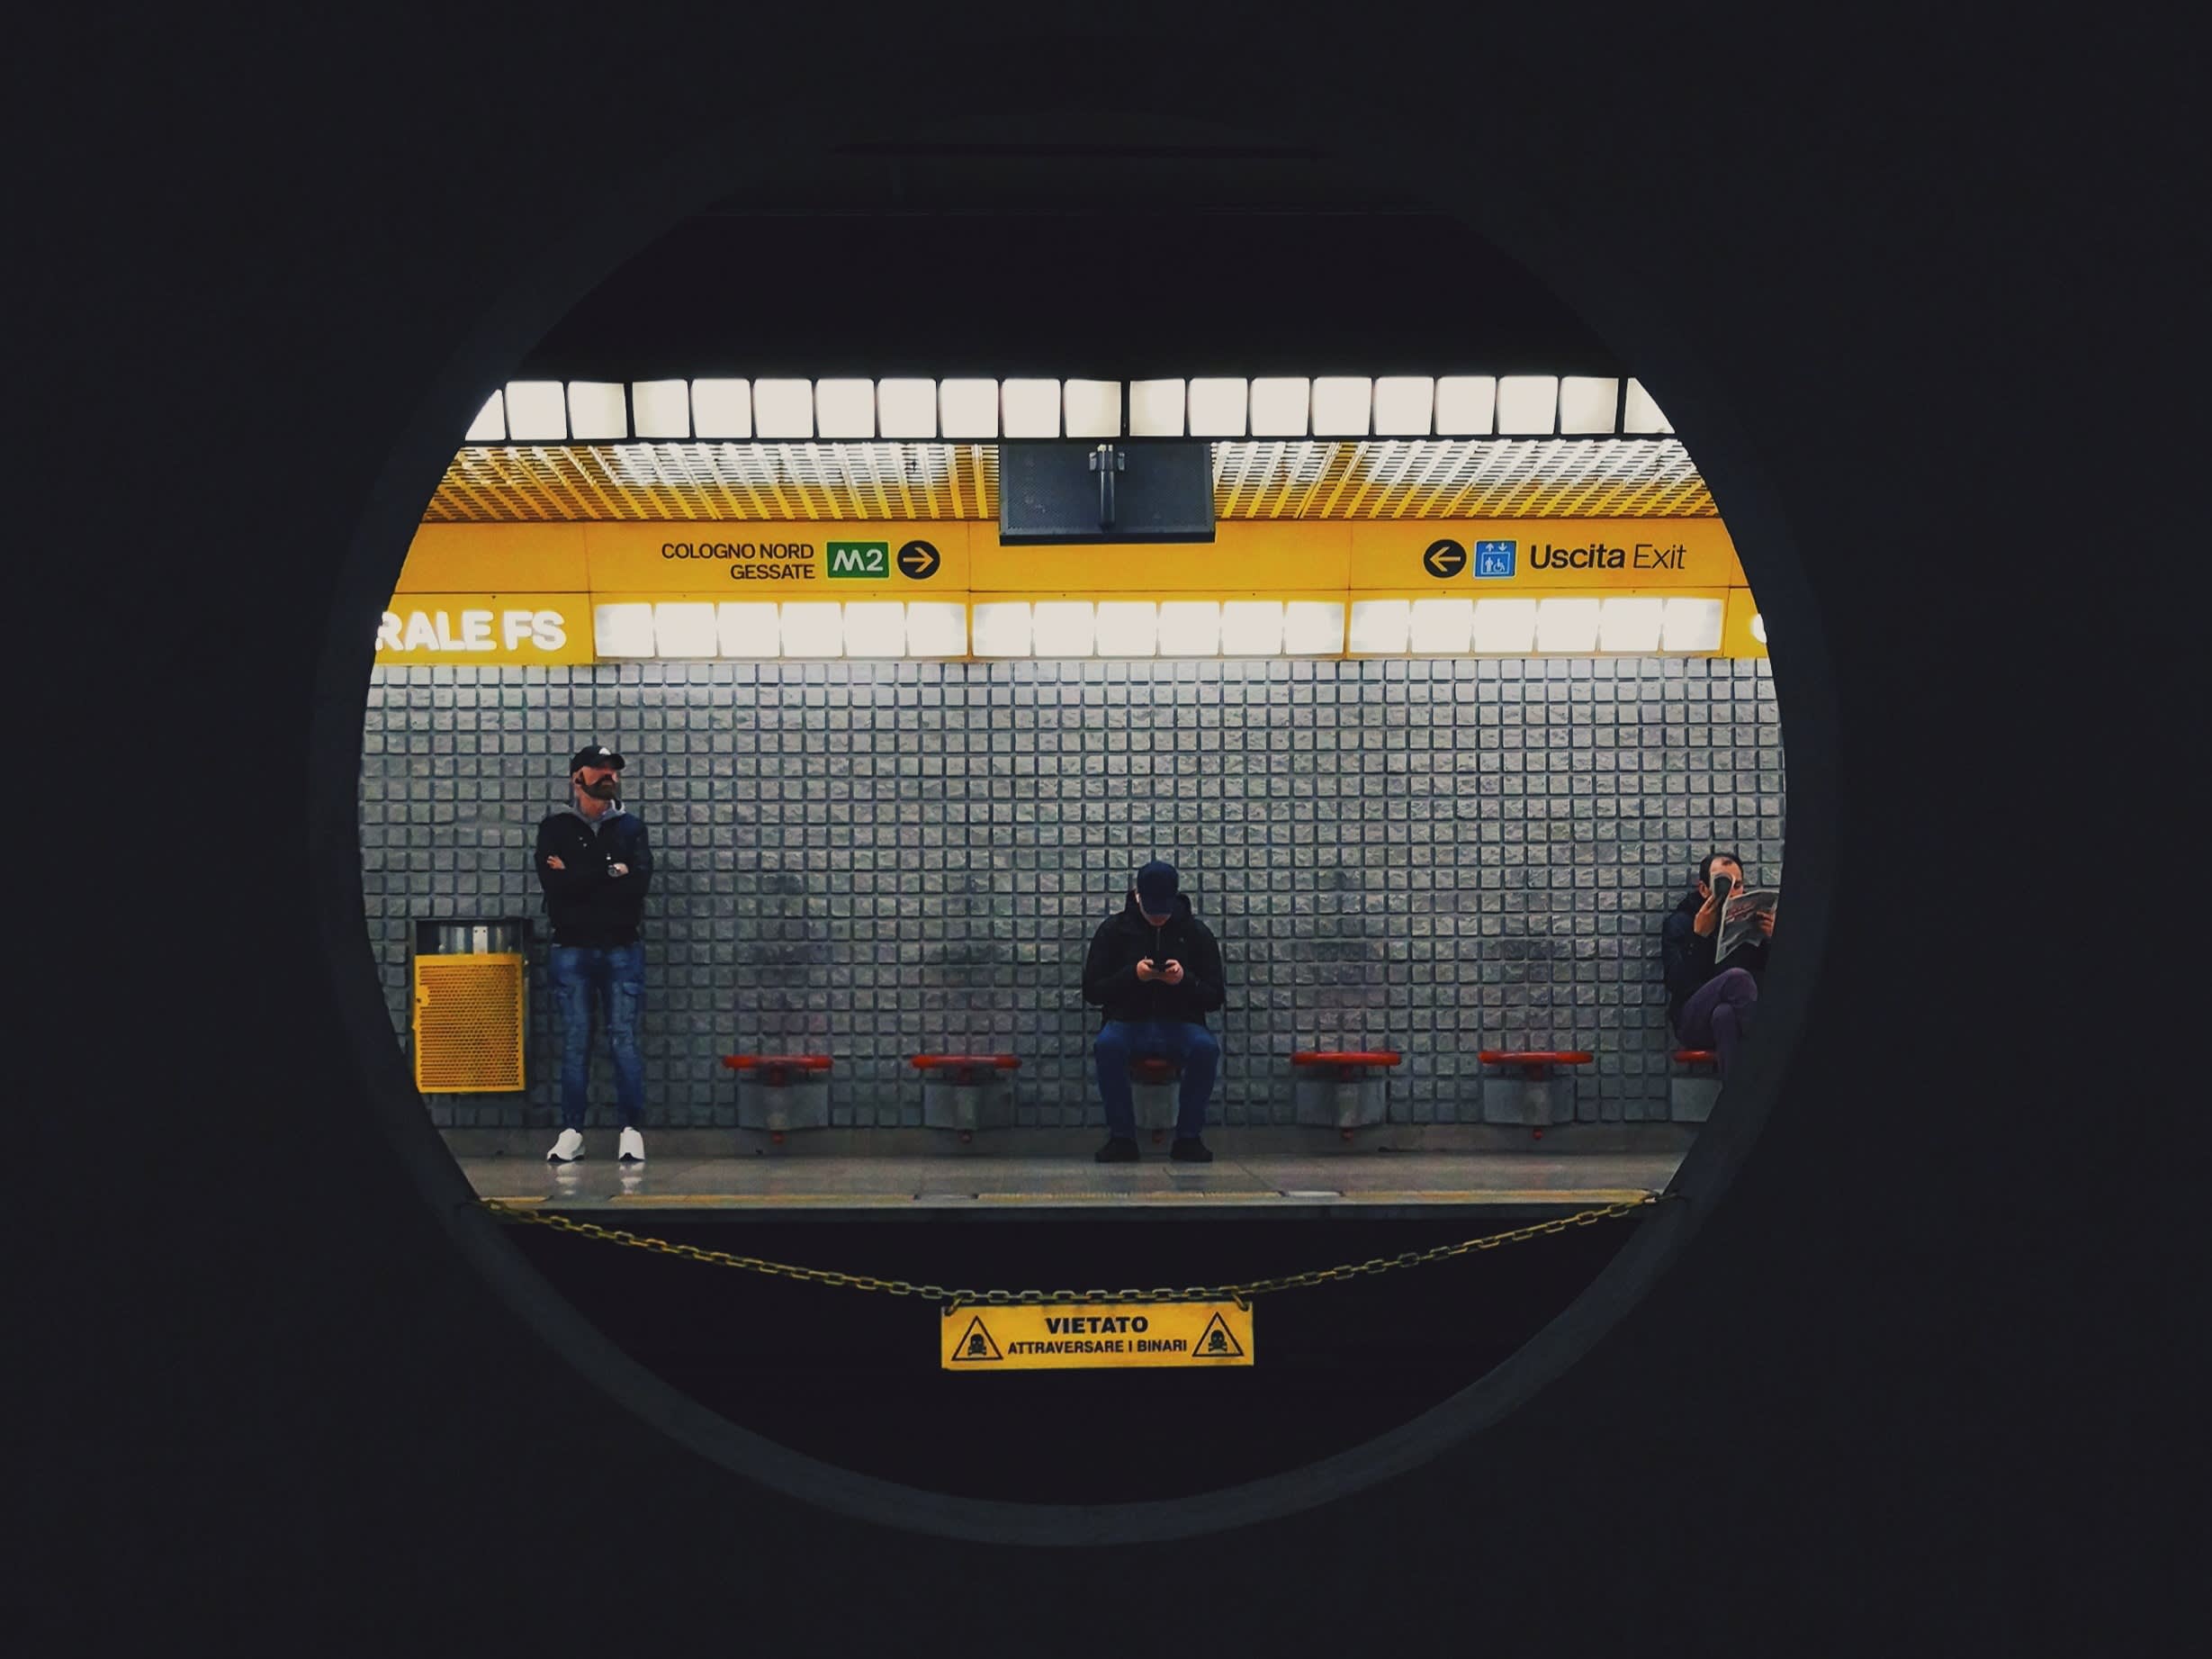 A picture of the inside of the Via Alessandro Paoli metro station in Milan's metropolitan area